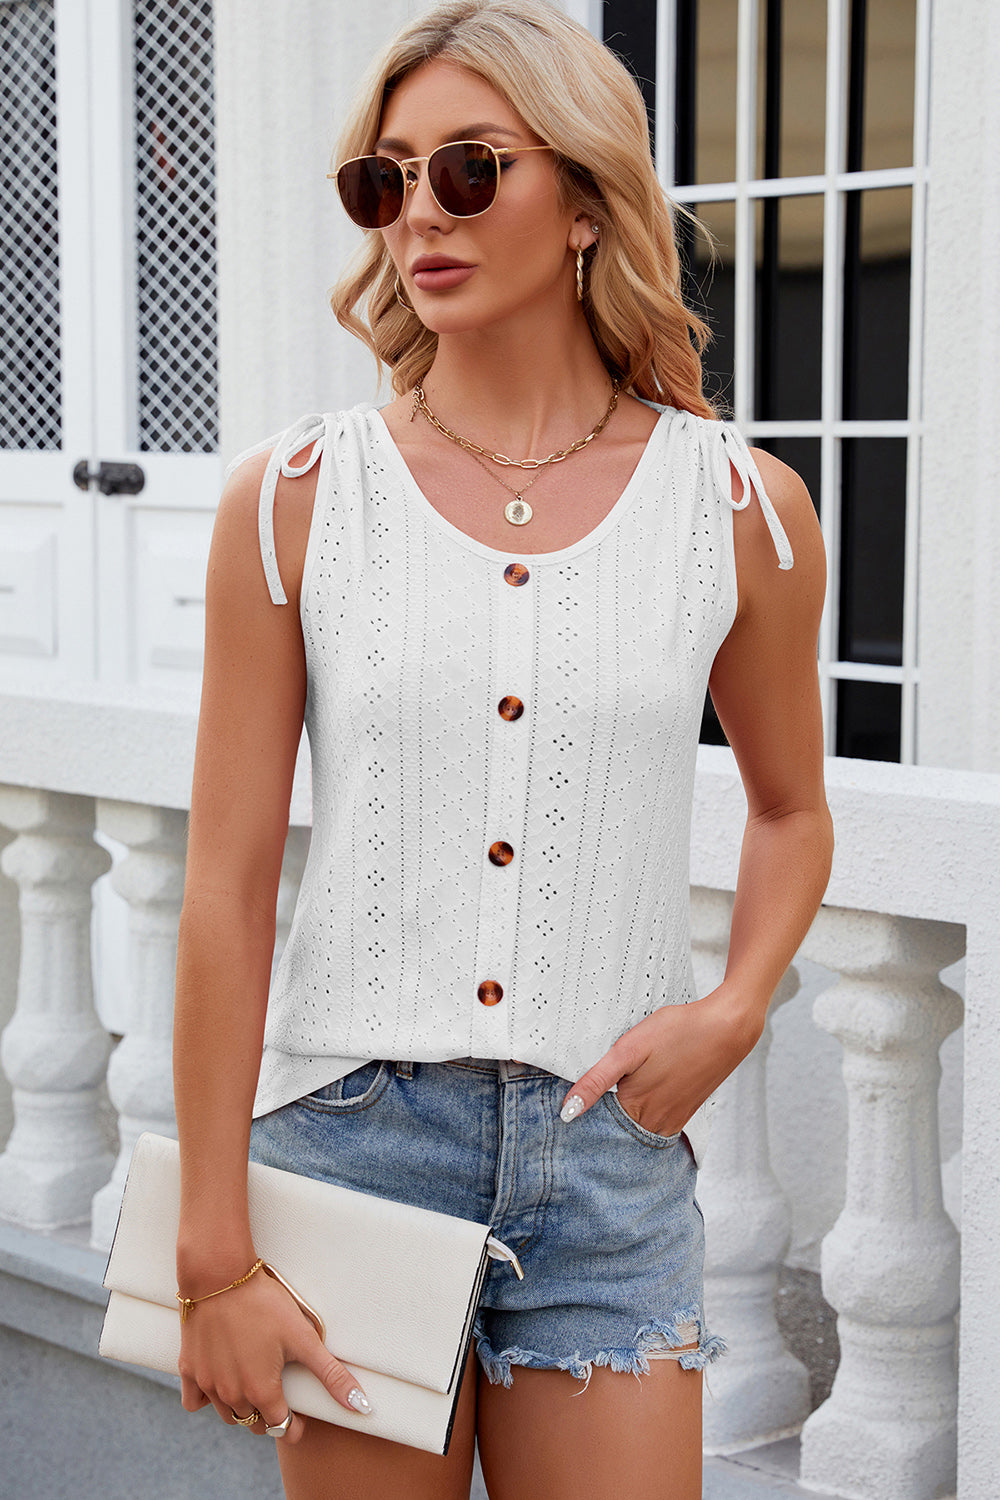 Discover elegance with our Eyelet Tank! A round neck, wide straps, and breathable fabric offer style and comfort for any occasion. Shop now!